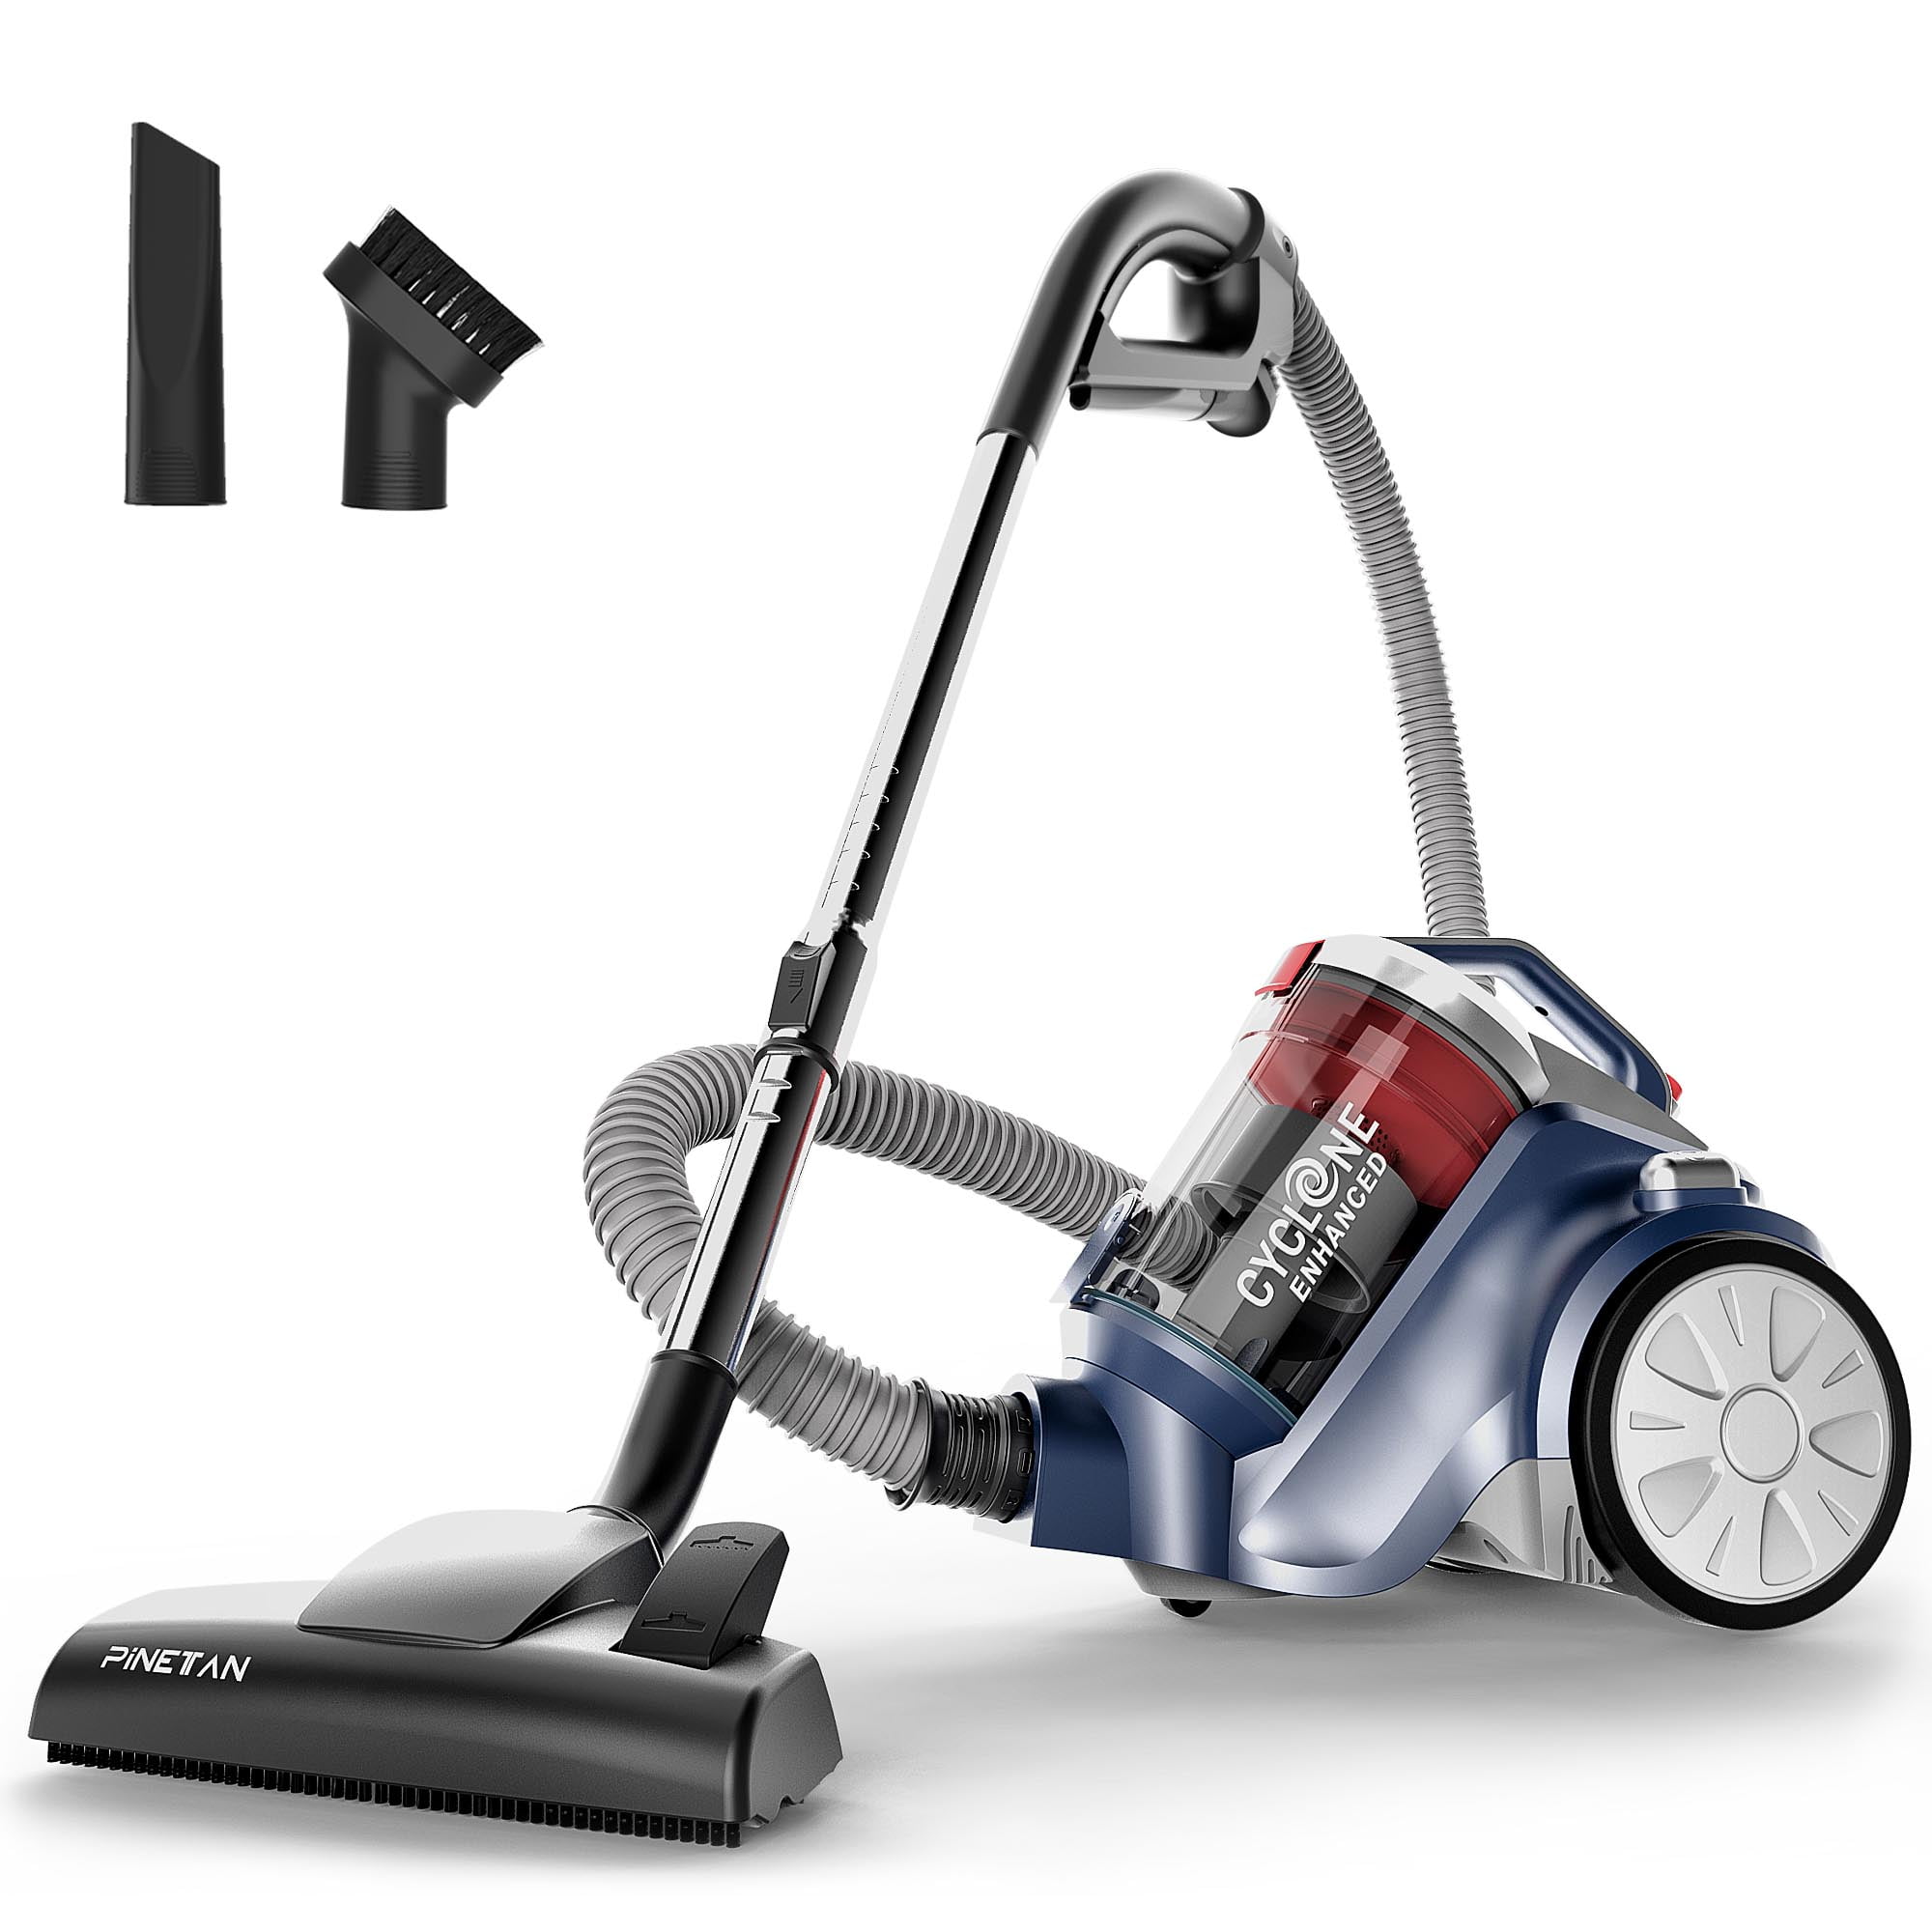 PINETAN Bagless Cyclone Canister Vacuum Cleaner, with Cyclone ...